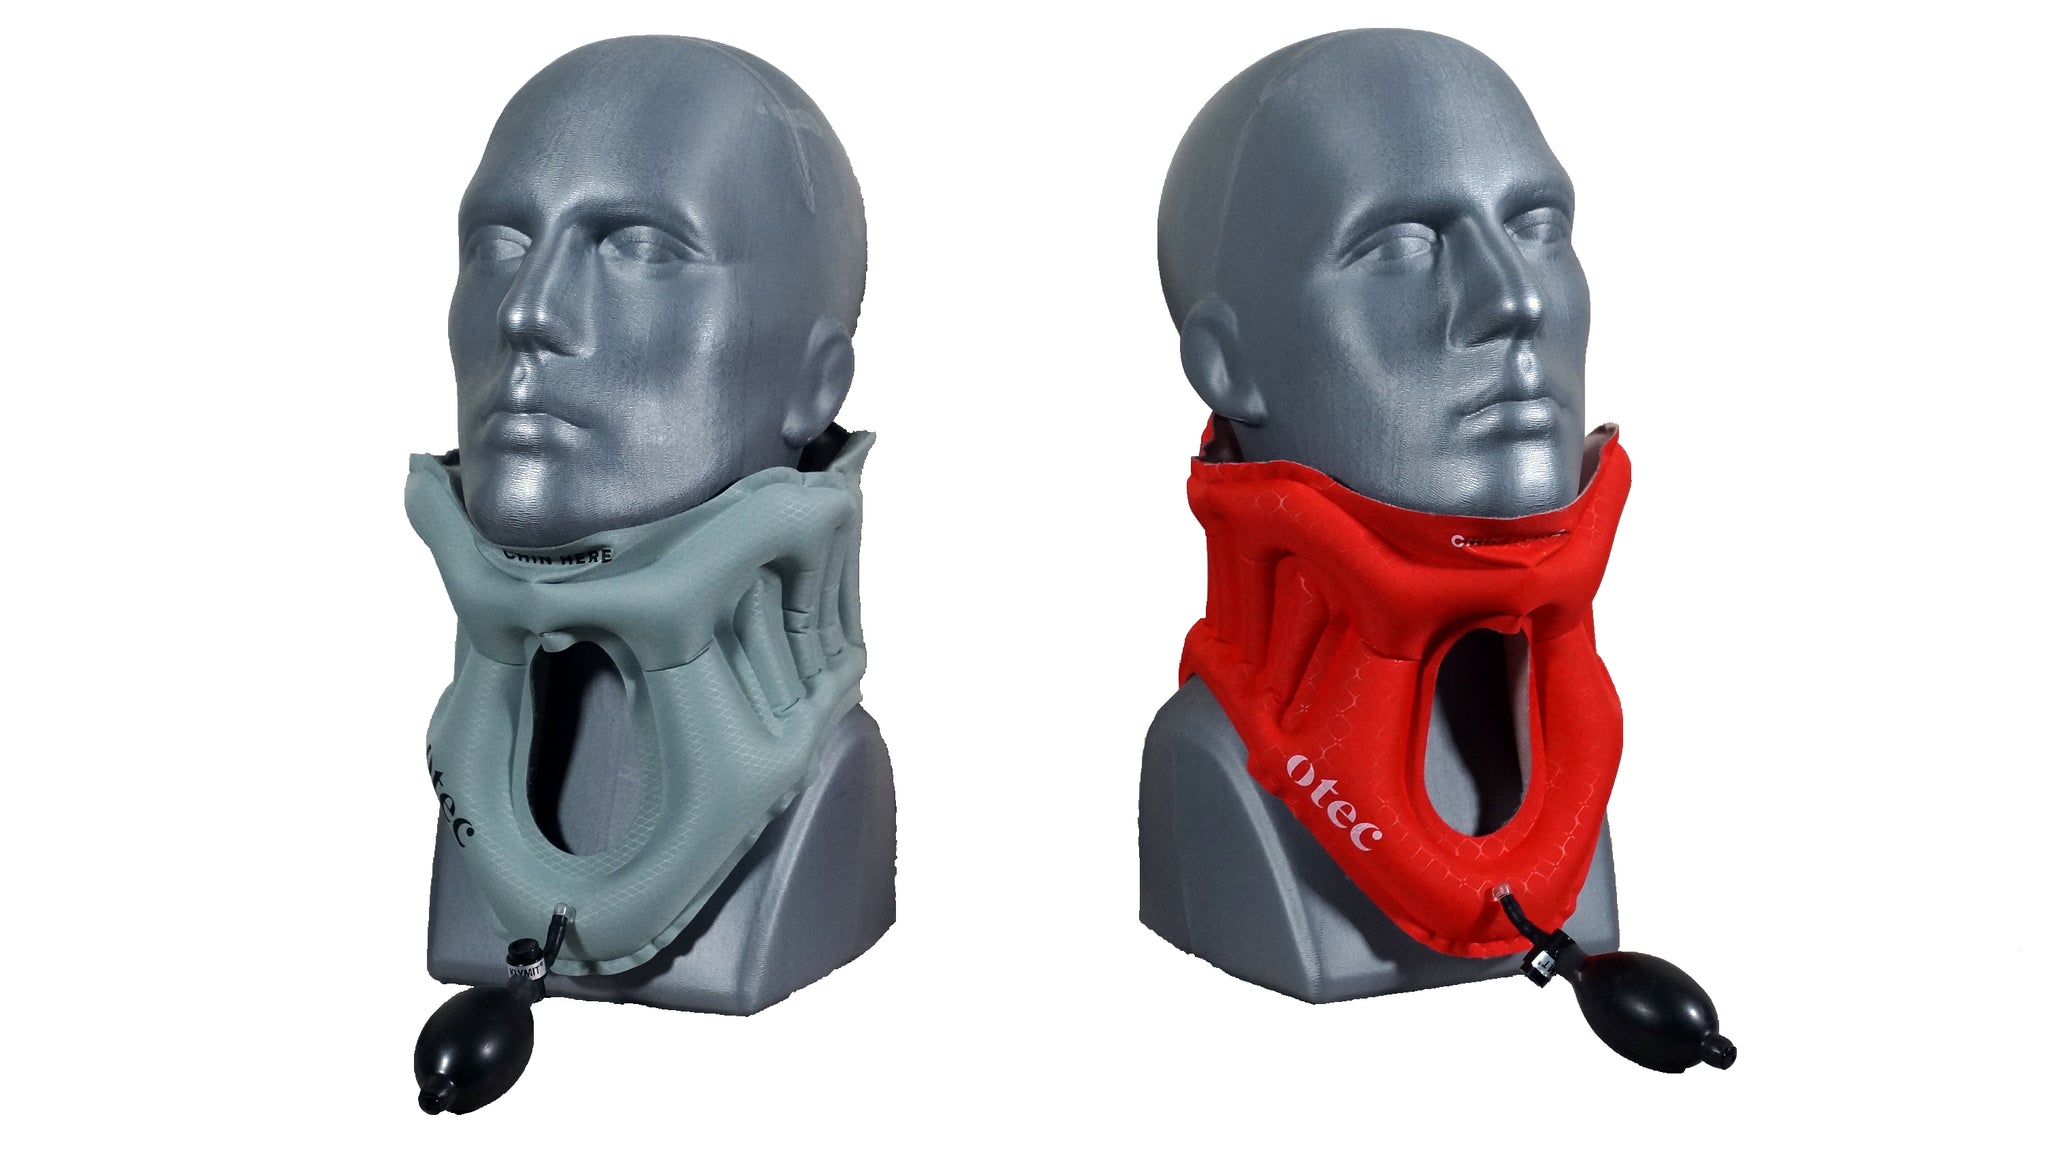 Inflated AER Cervical Collar in gray and red